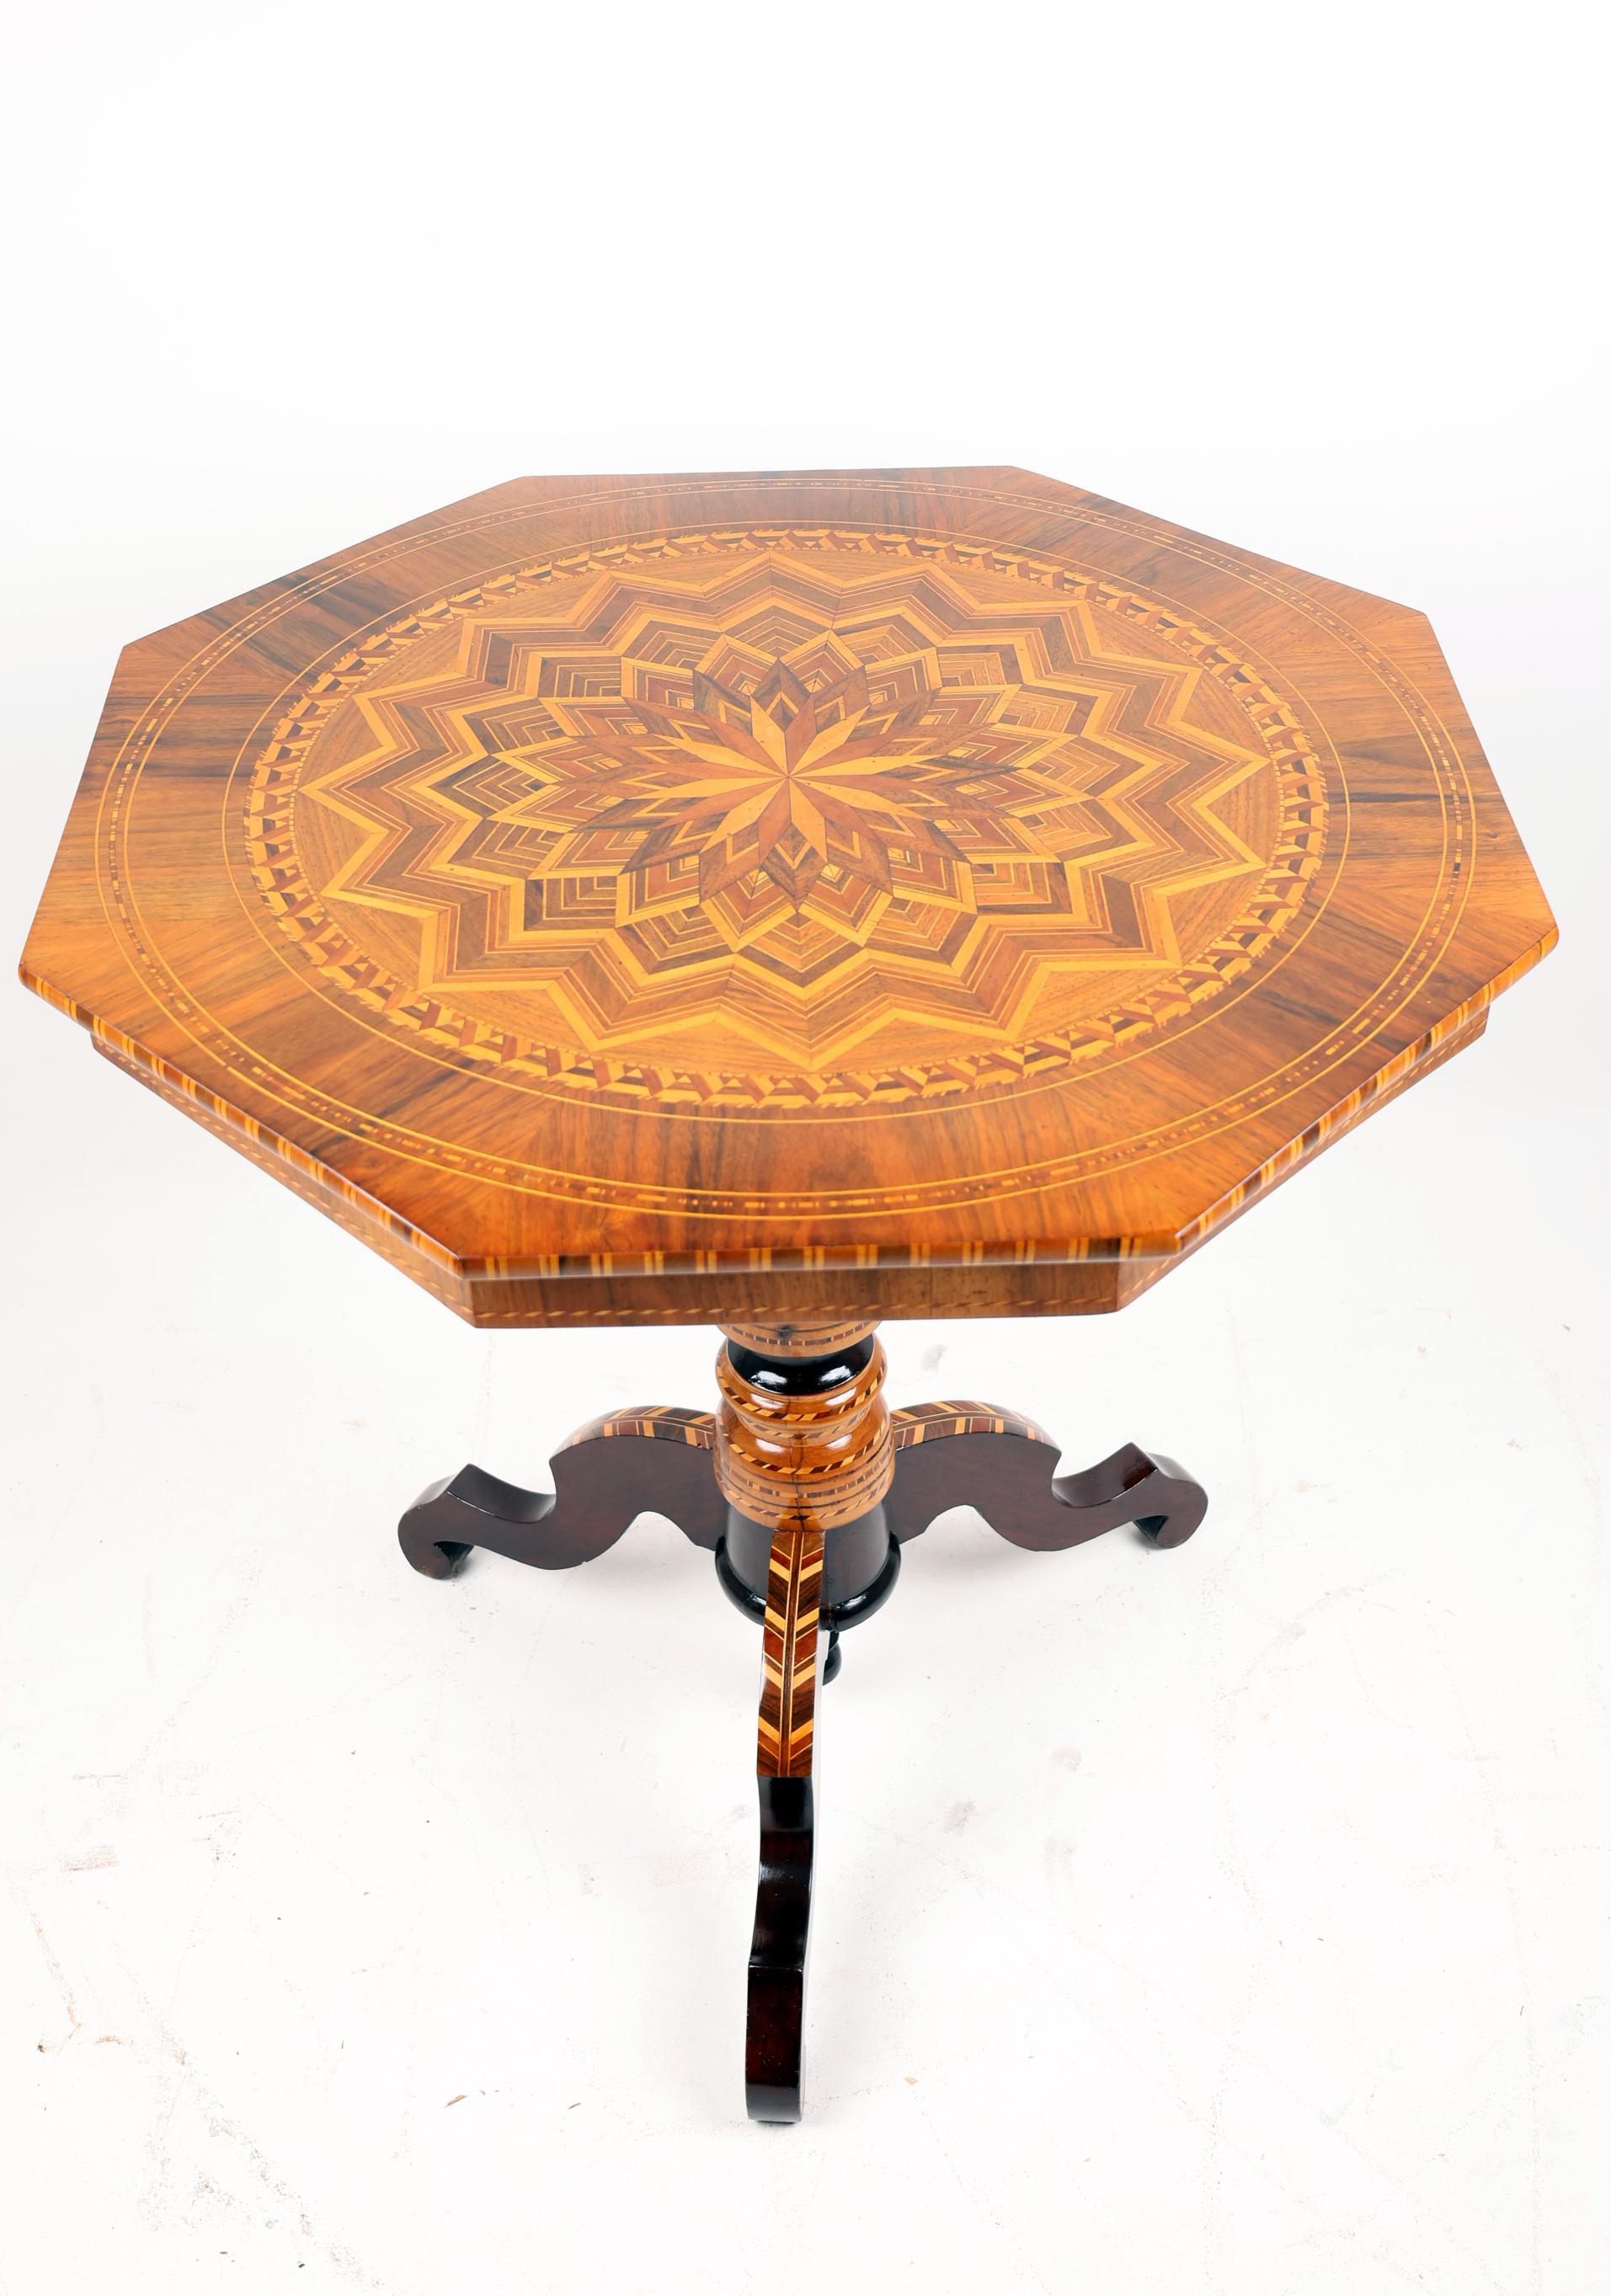 19th Century Center table with marquetry,
Italy, Ca.1860
Walnut with fruit woods,

Late 19th century Italian octagonal center table with marquetry top inlaid with walnut and various fruit woods. The tripod base also inlaid with geometric patterns.